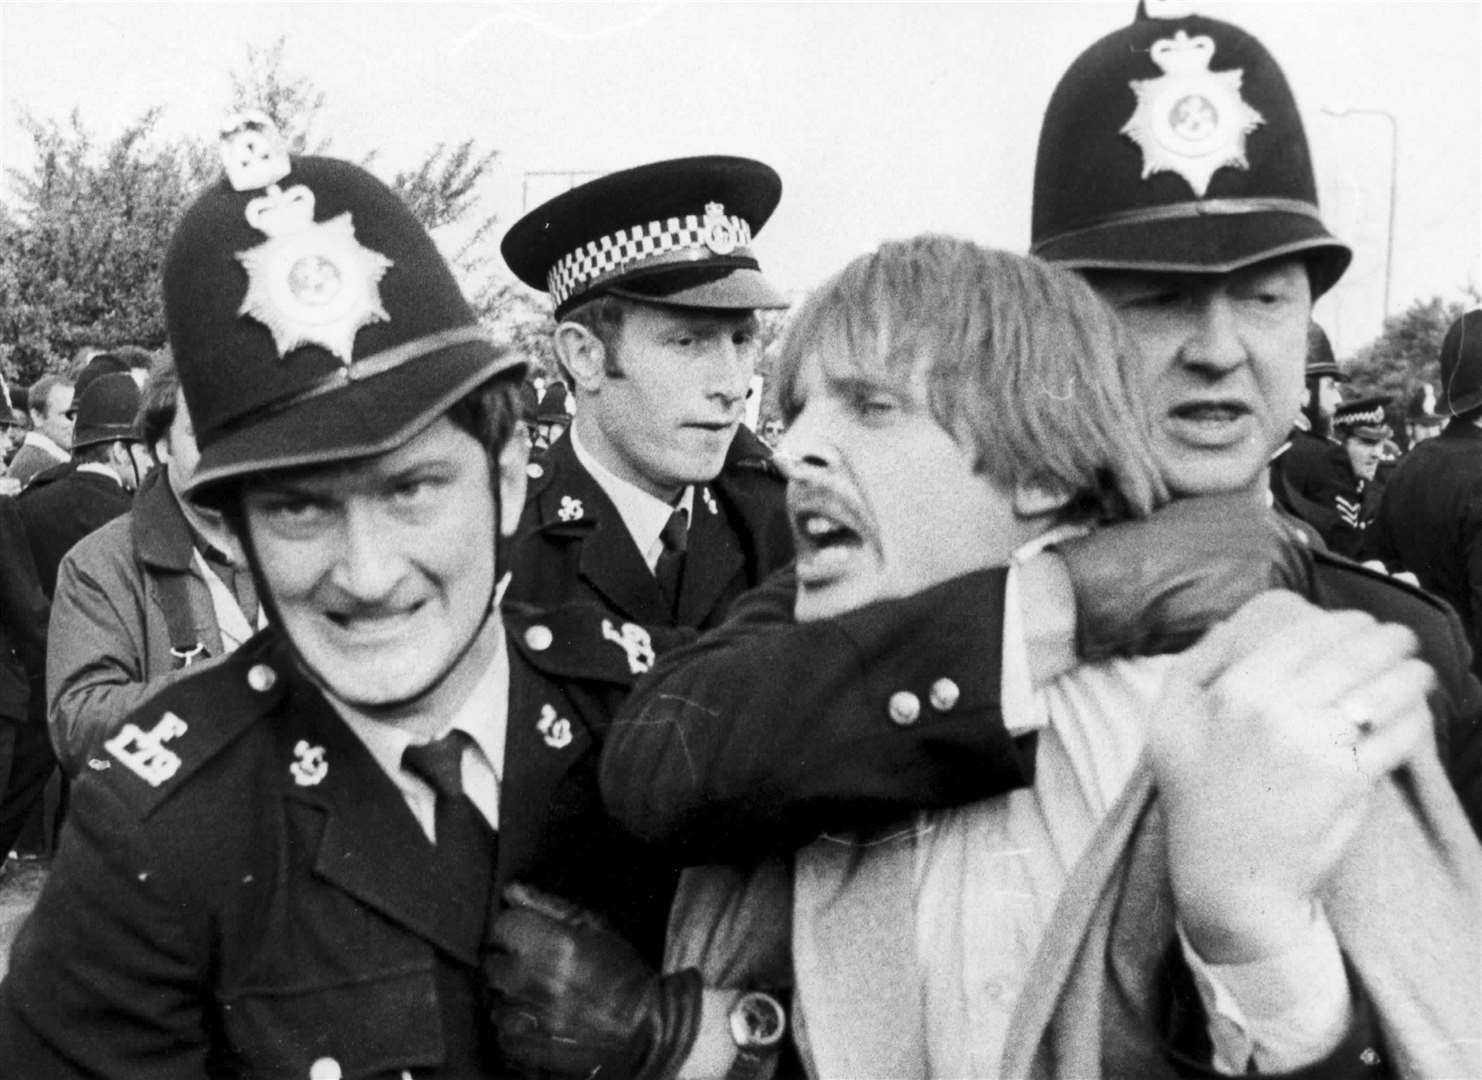 Police arresting a striking worker outside the Grain Power Station in June 1980. The dispute was over wages, working conditions and flexibility of labour